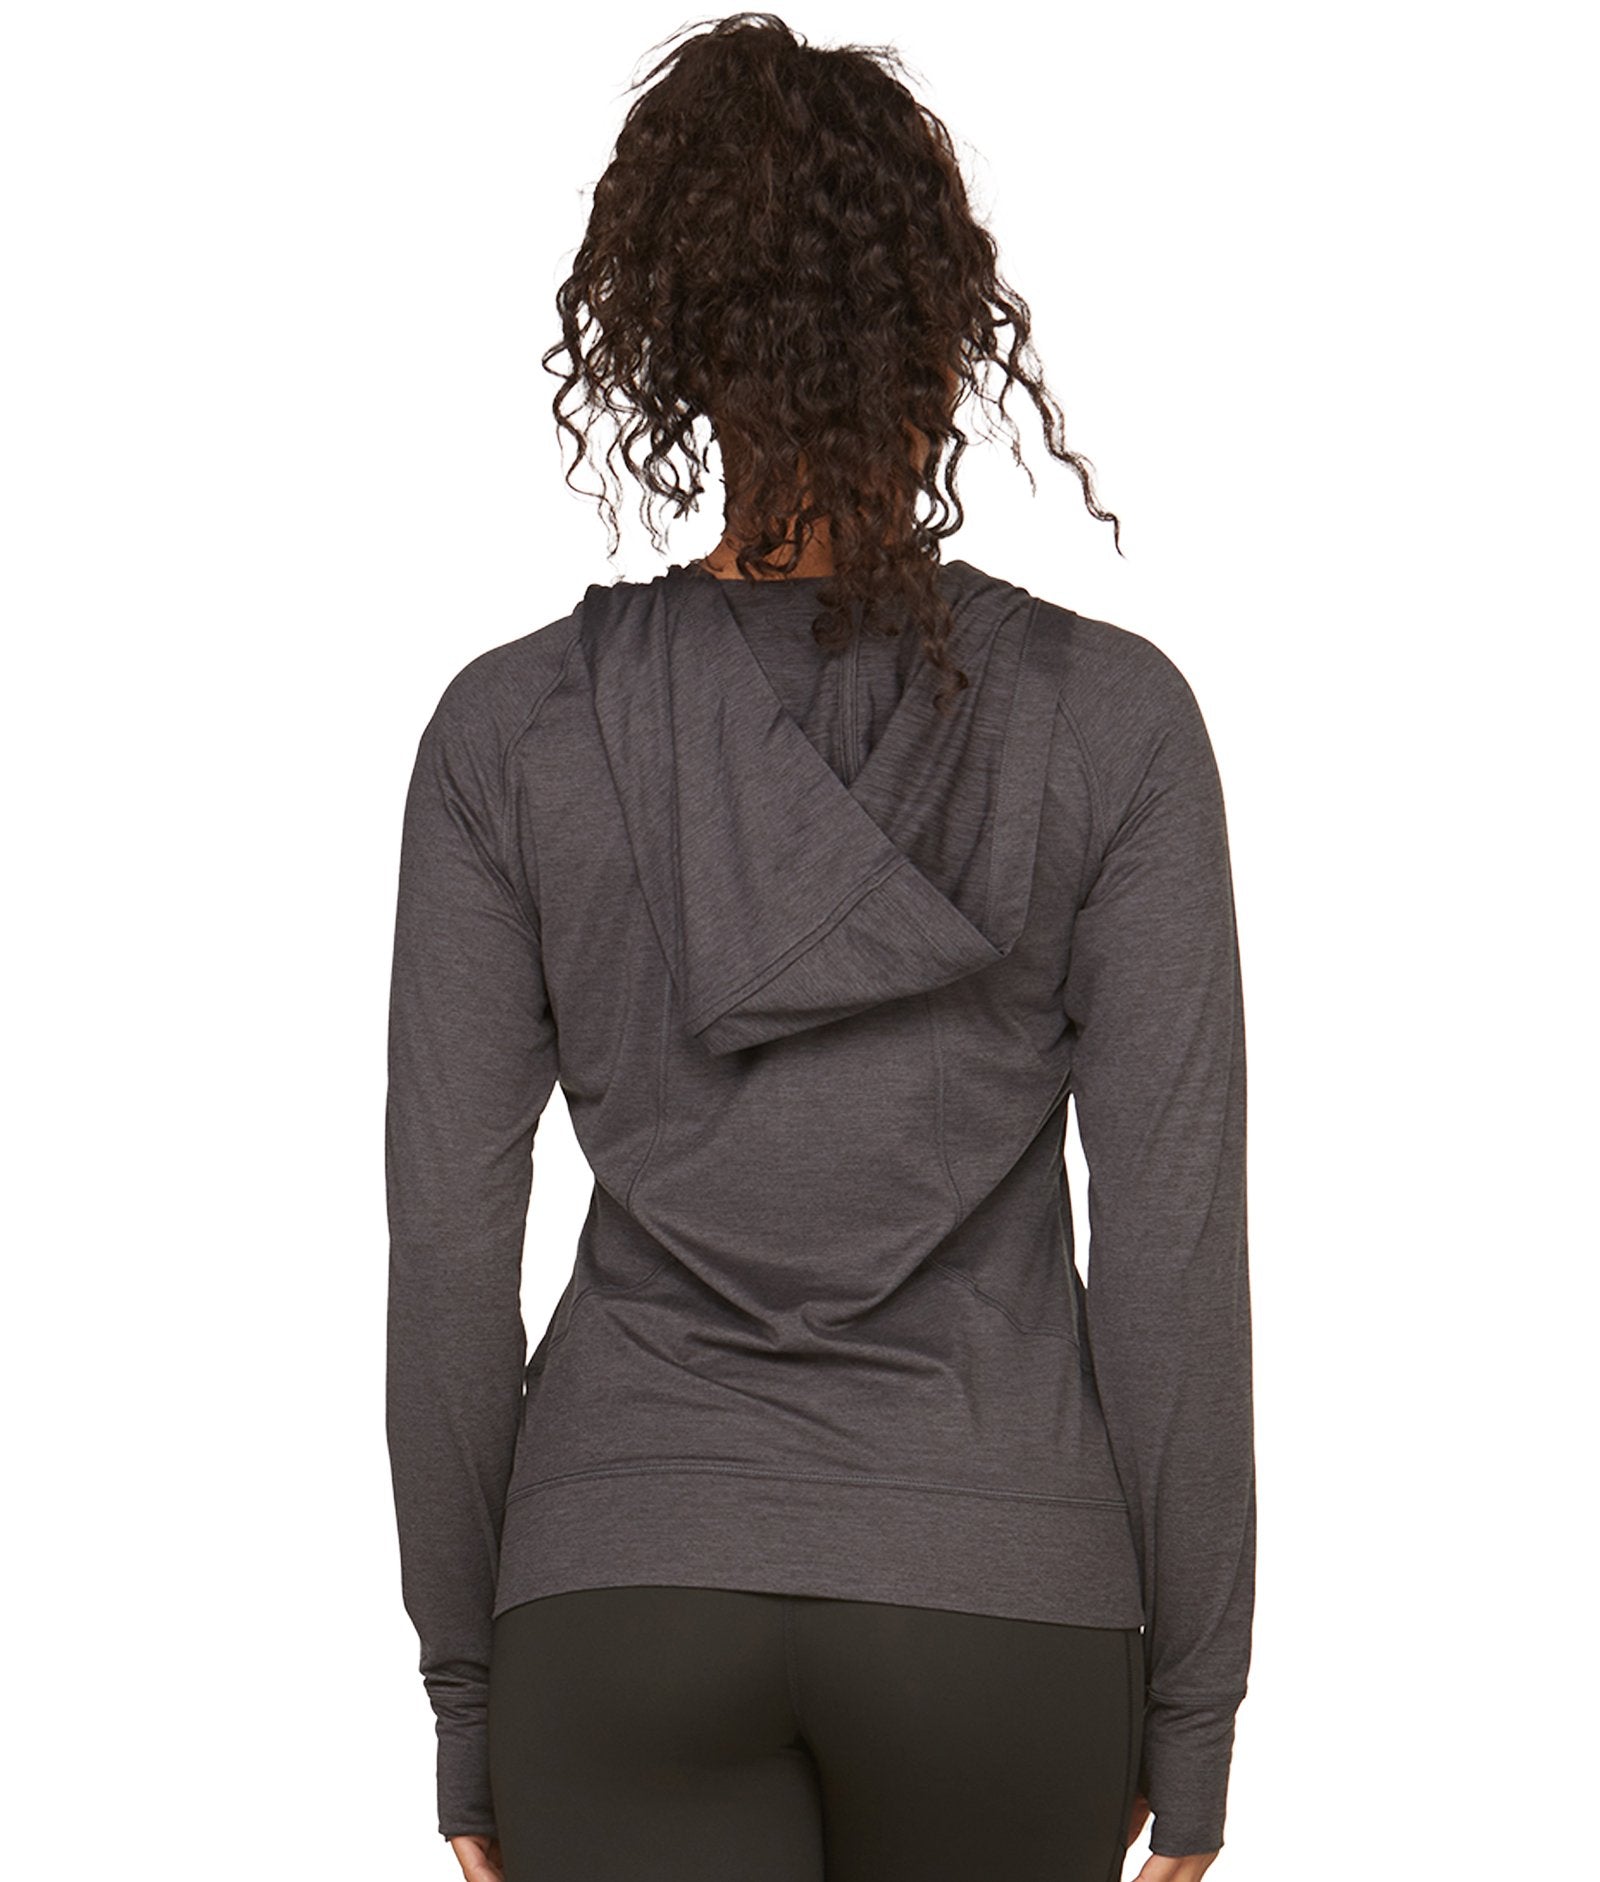 Women's Ablaze Eco-Friendly Recycled Polyester Legging with Pockets